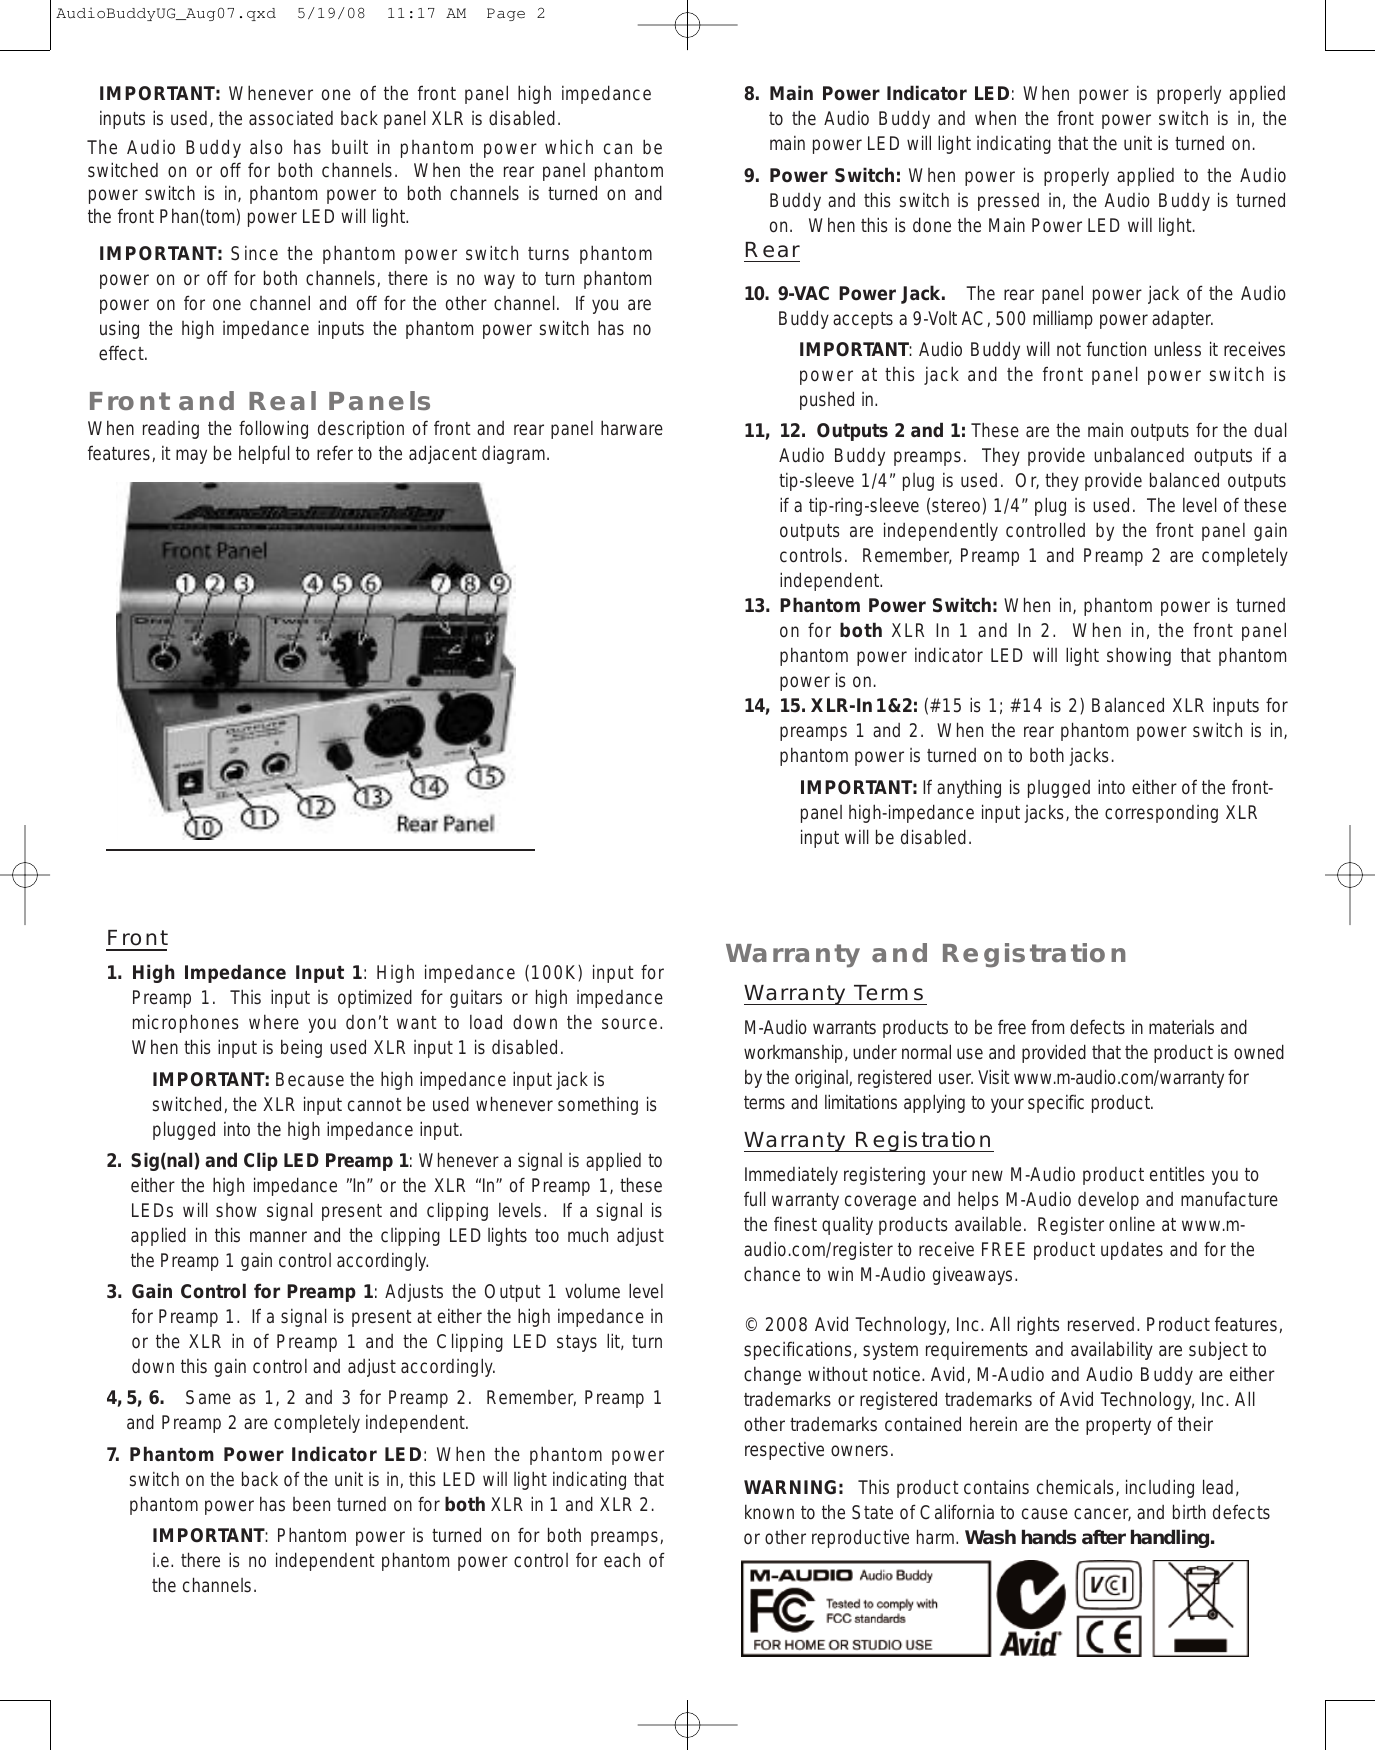 Page 7 of 8 - M-Audio M-Audio-Audio-Buddy-Dual-Mic-Preamp-Users-Manual- Audio Buddy User Guide  M-audio-audio-buddy-dual-mic-preamp-users-manual